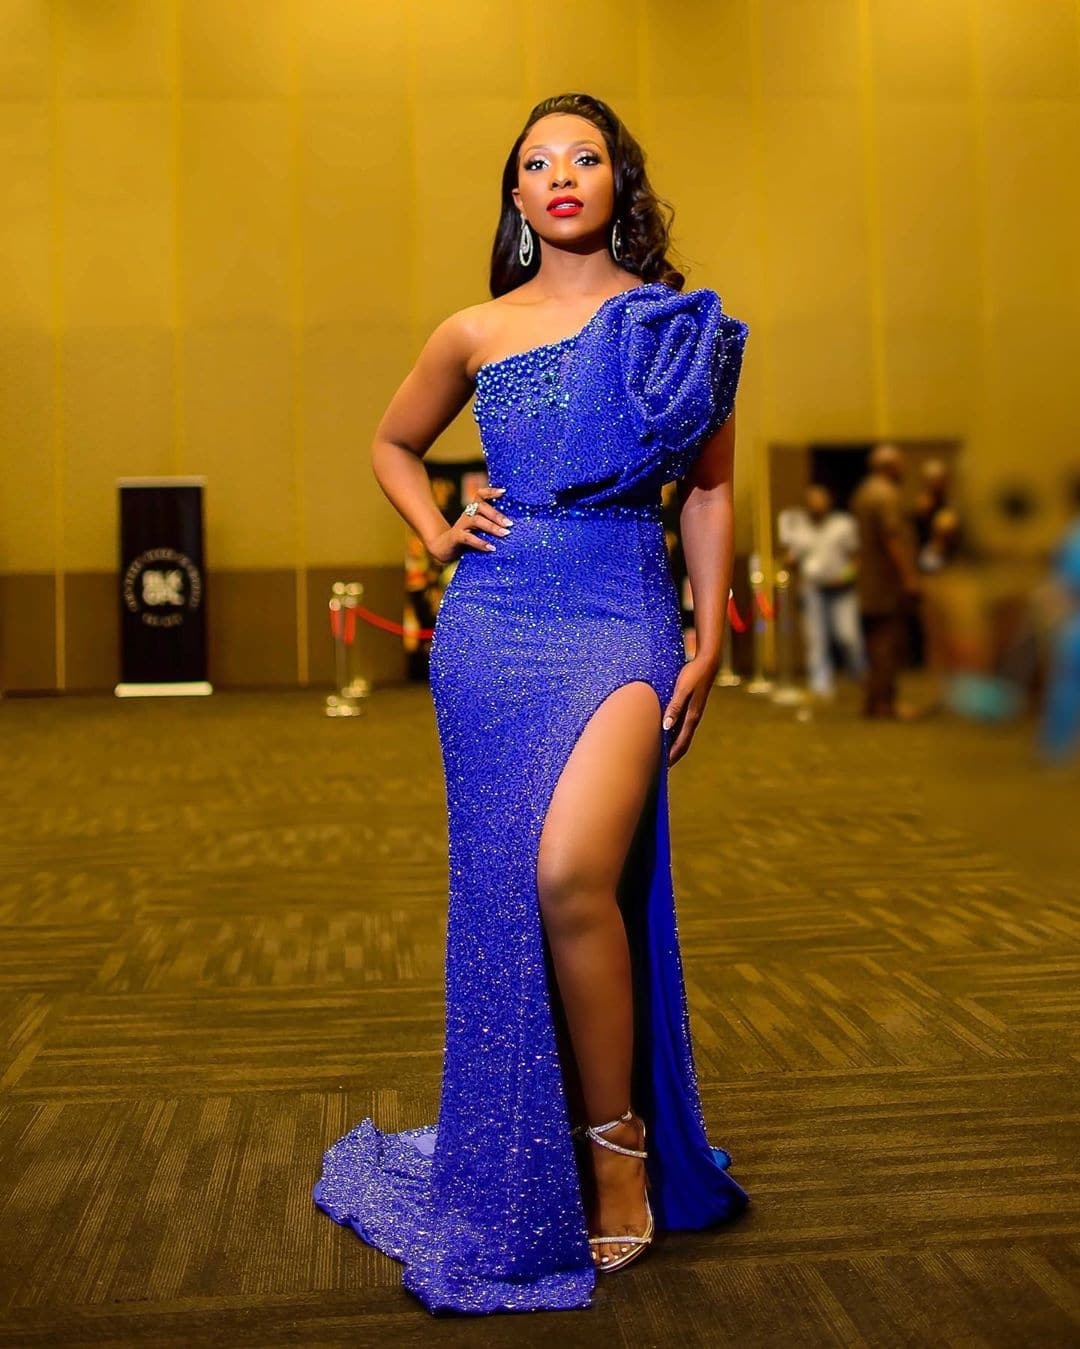 pearl-modiadie-how-to-wear-blue-with-style-pantone-colour-of-the-year-2020